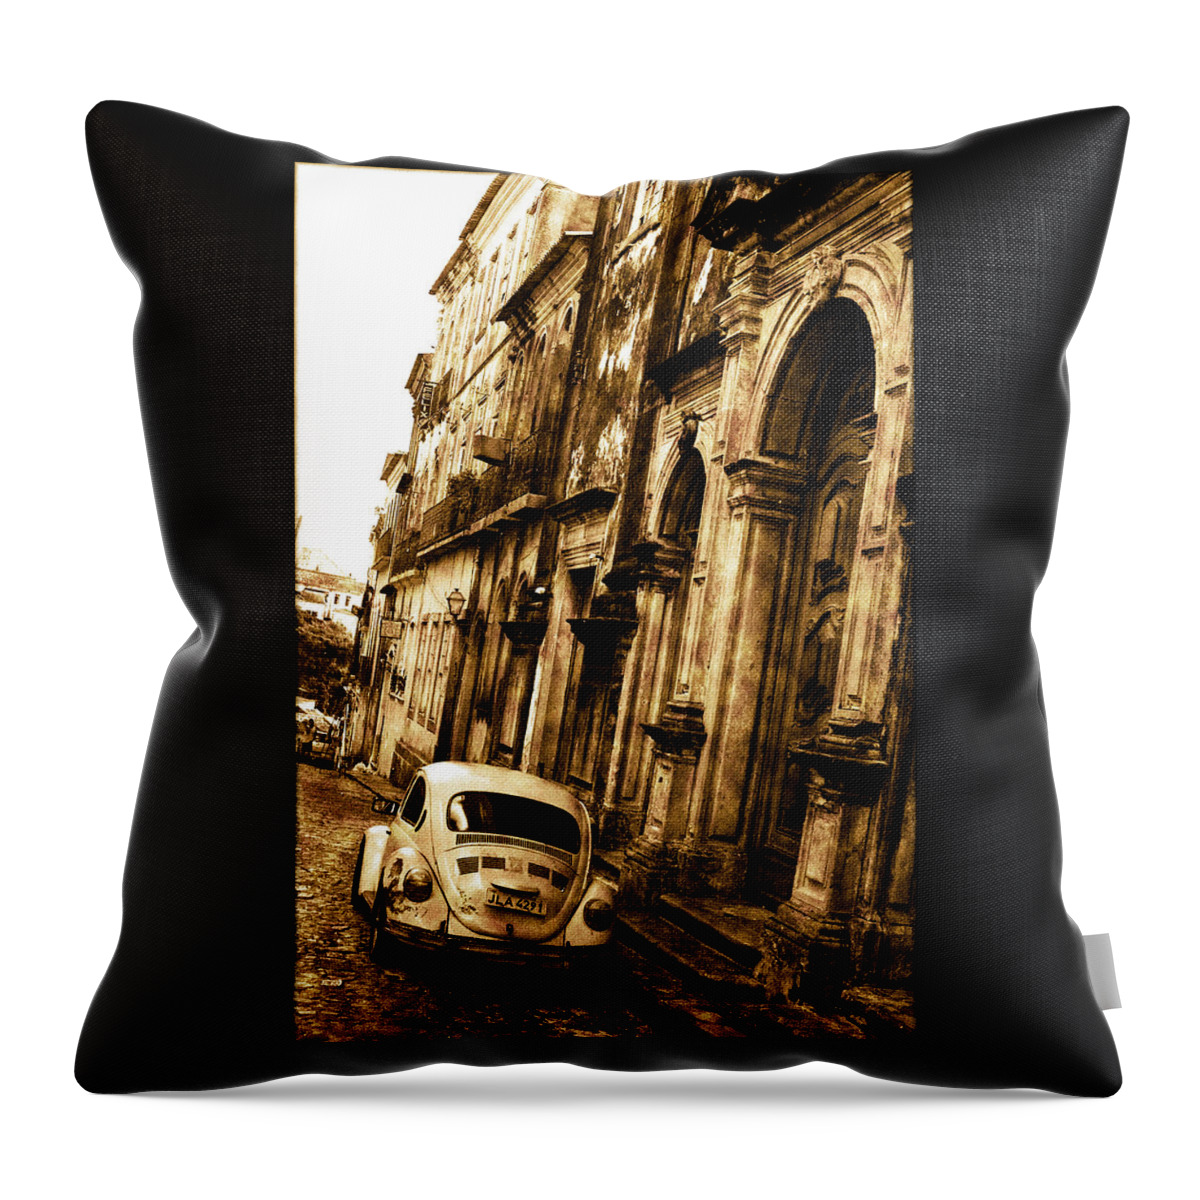 Vw Bug Throw Pillow featuring the photograph Punch Buggy White by Patrick Klauss